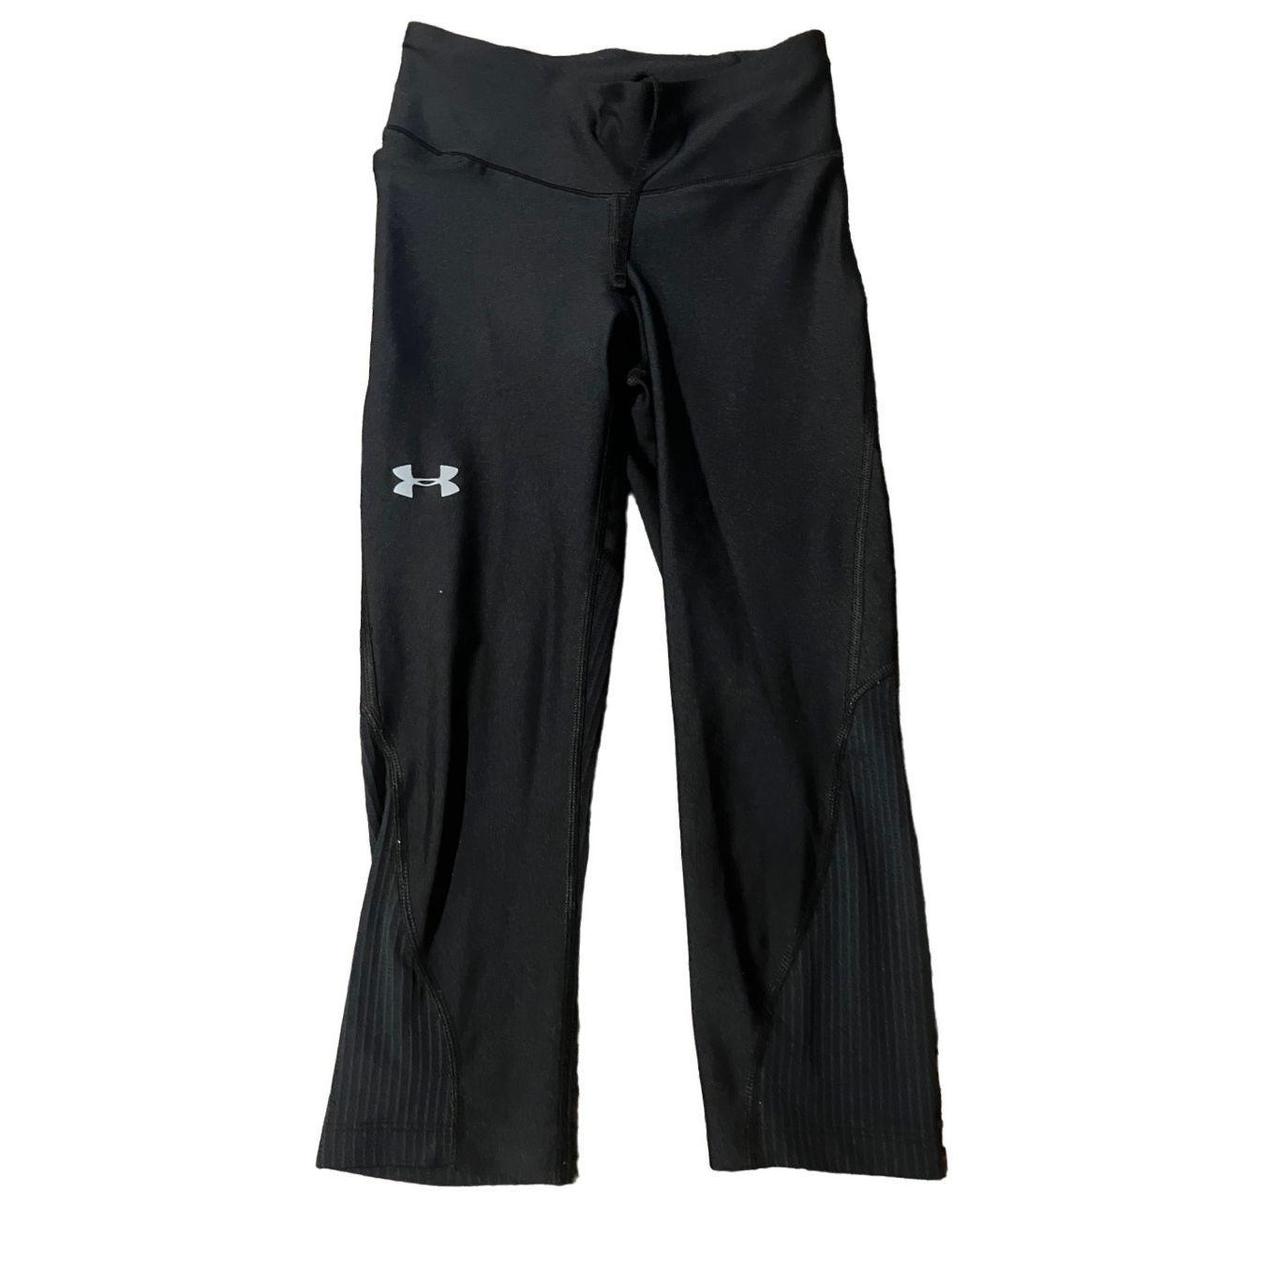 Under armour leggings size xs compression, Worn two